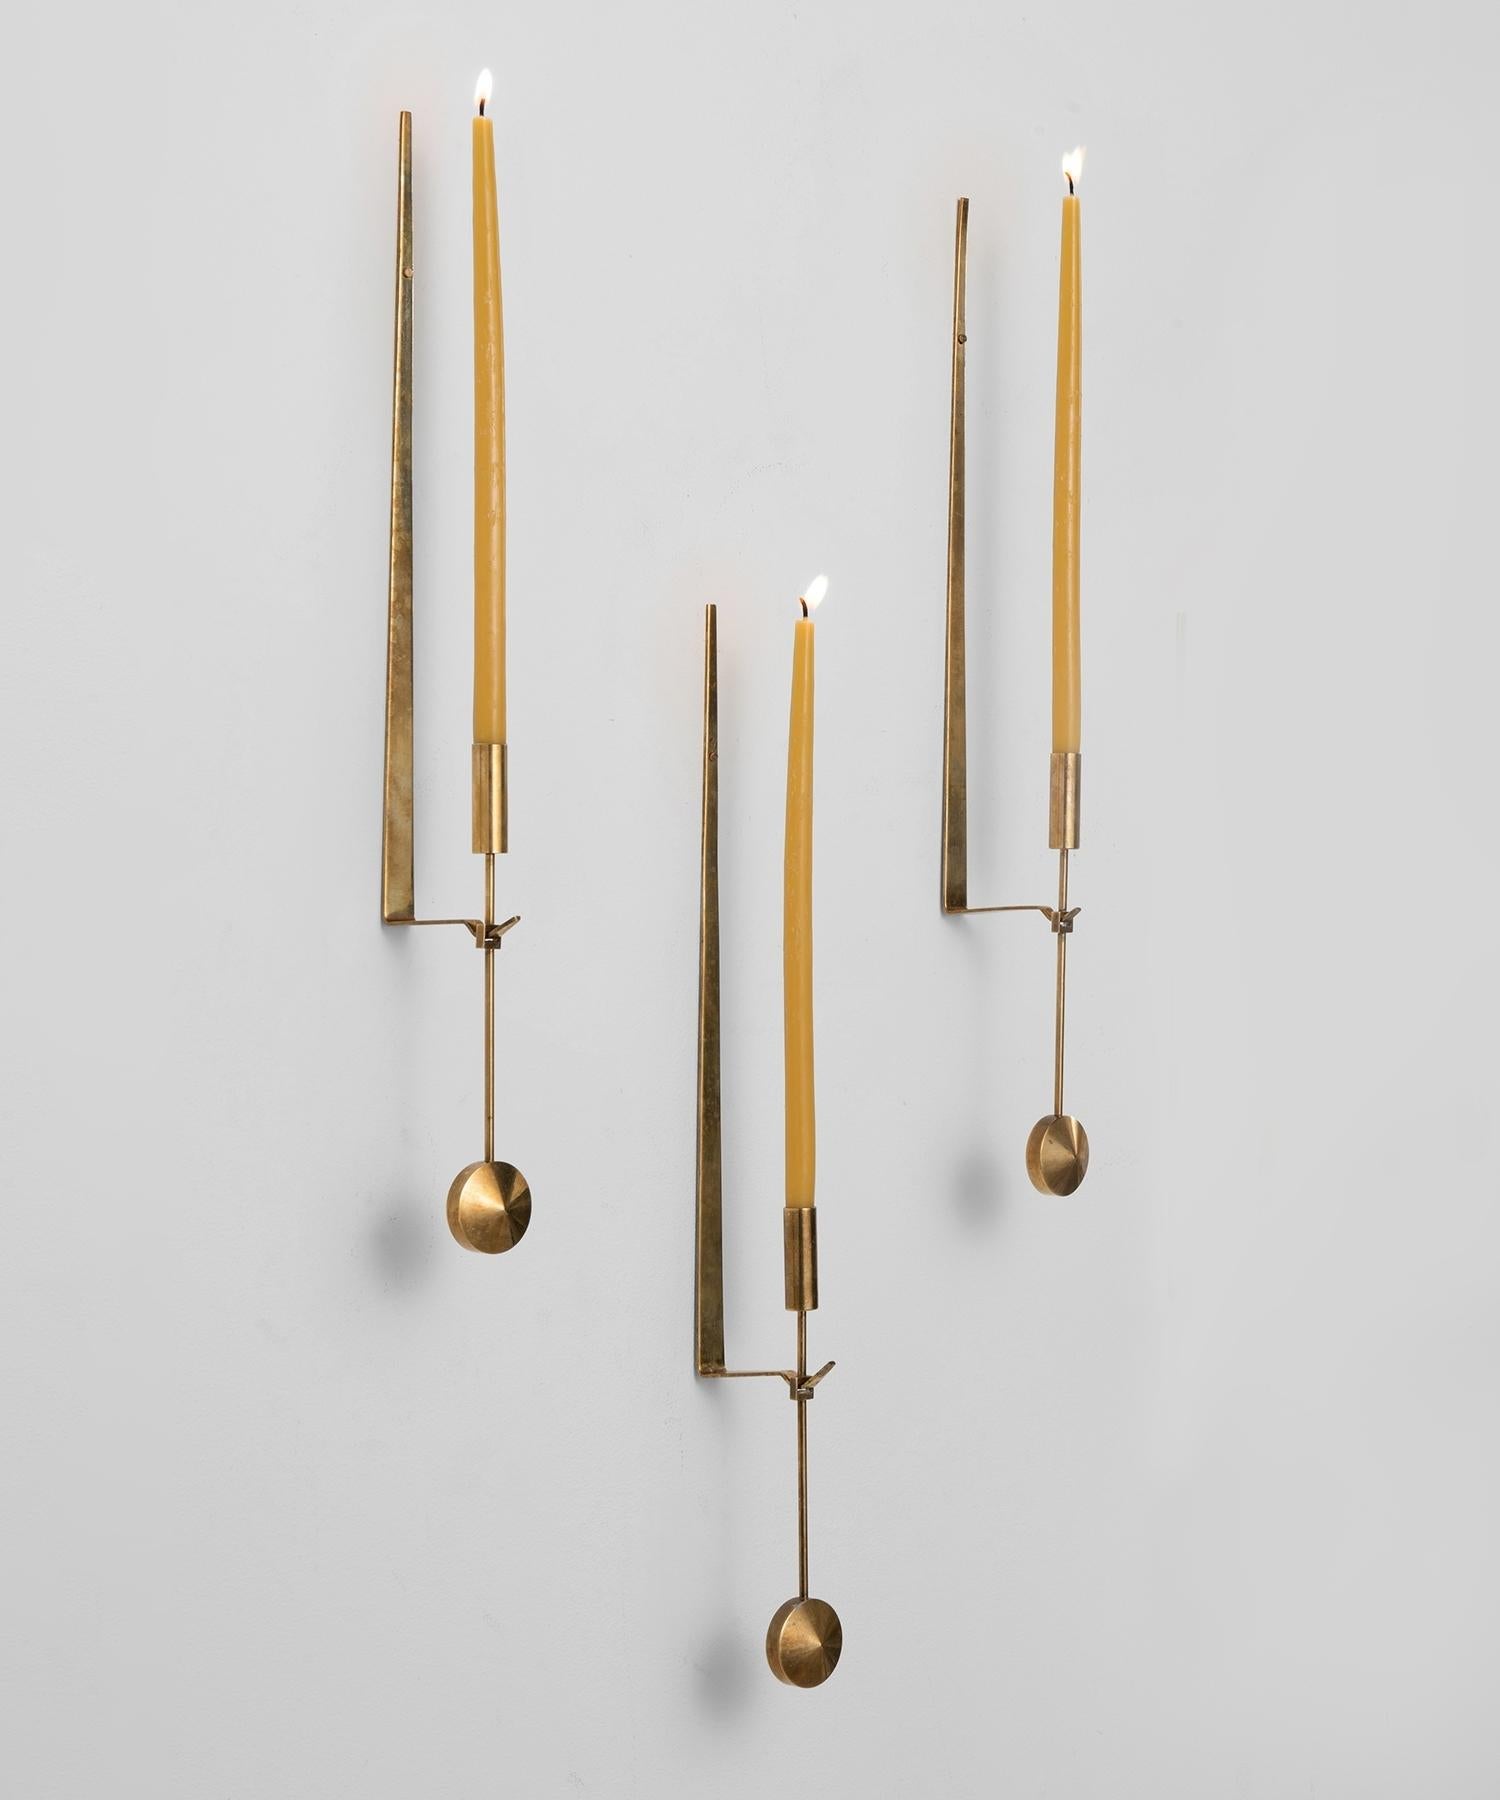 Brass candleholder by Pierre Forsell, Sweden, circa 1970.

Unique wall-mounted brass candleholder, produced by Skultuna.